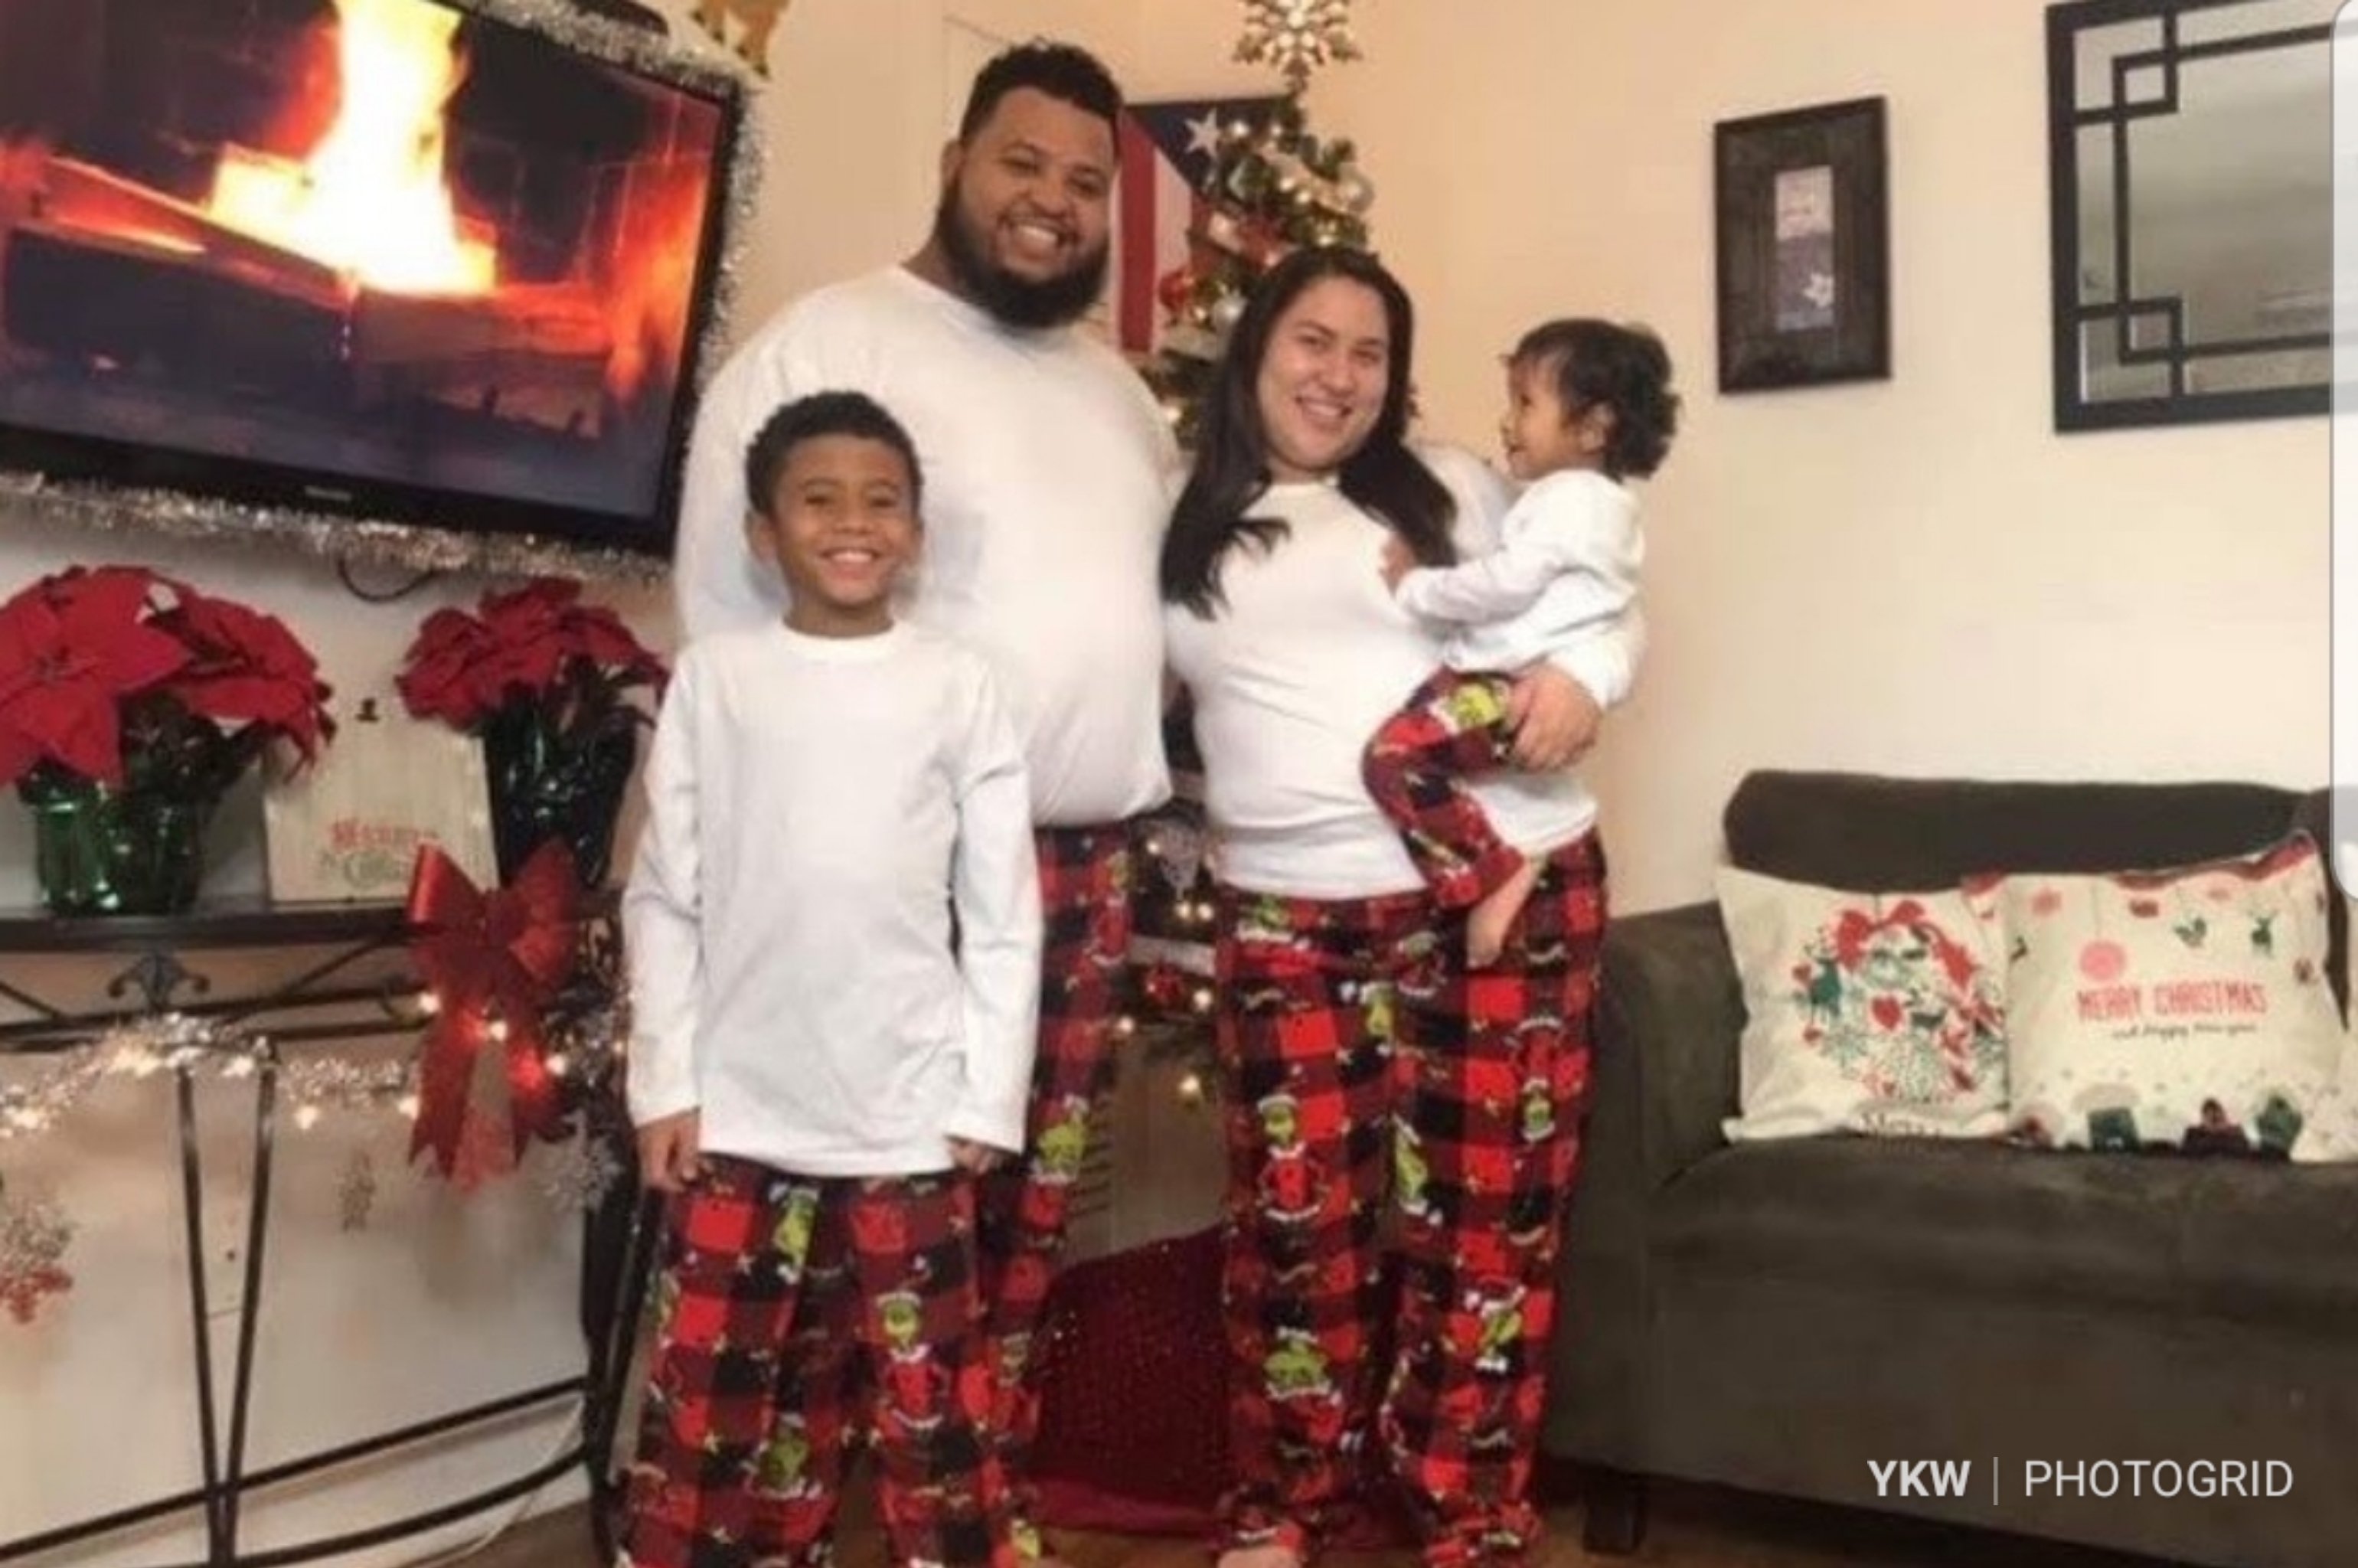 Pomona Family Of 4 Killed In Car Accident Witnessed By Family Members Traveling Behind